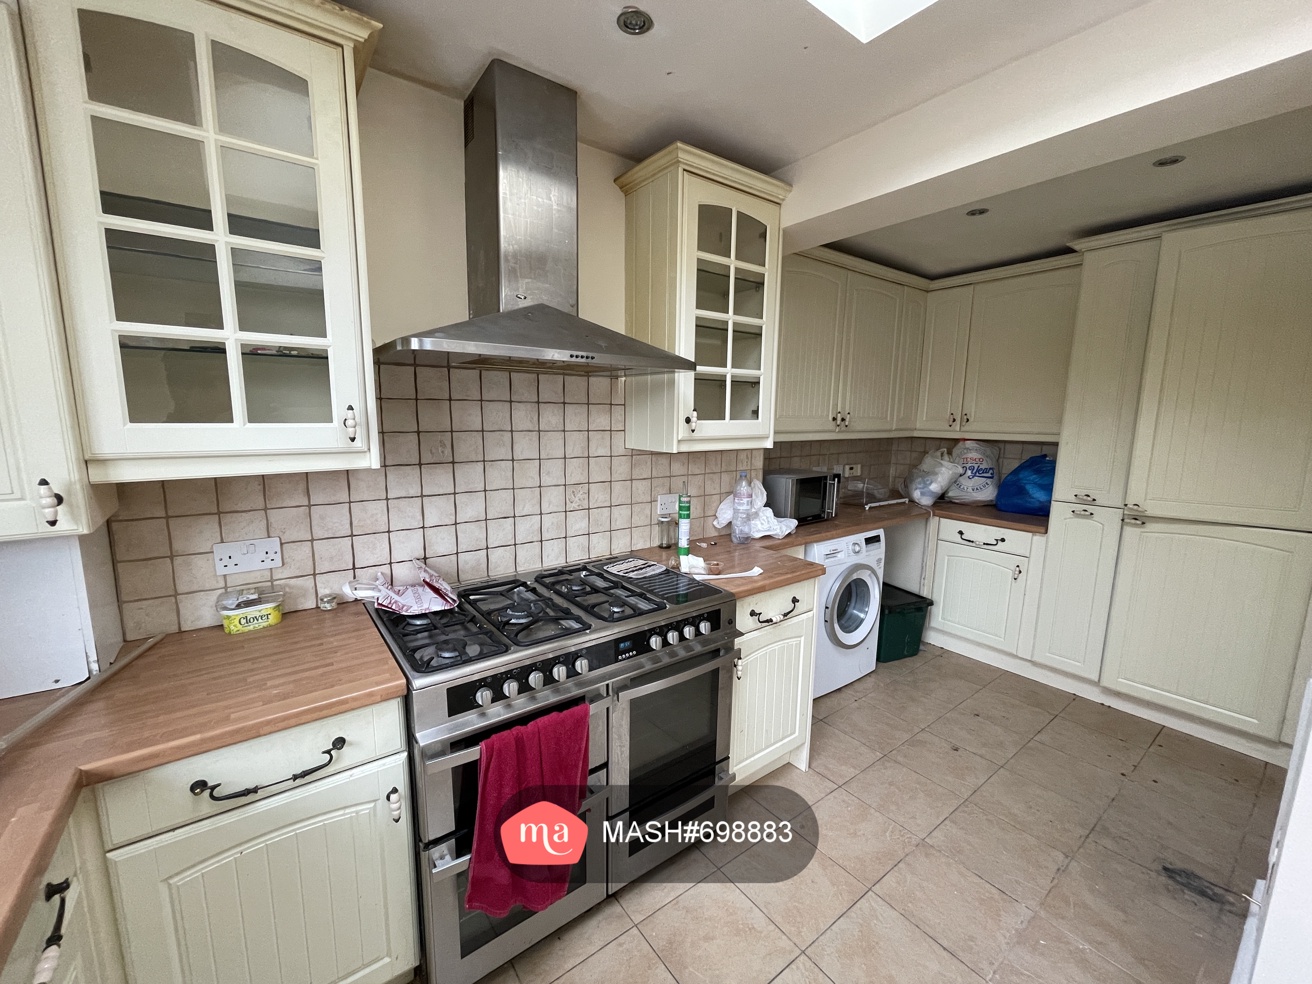 4 Bedroom Terraced to rent in Sutton - Mashroom